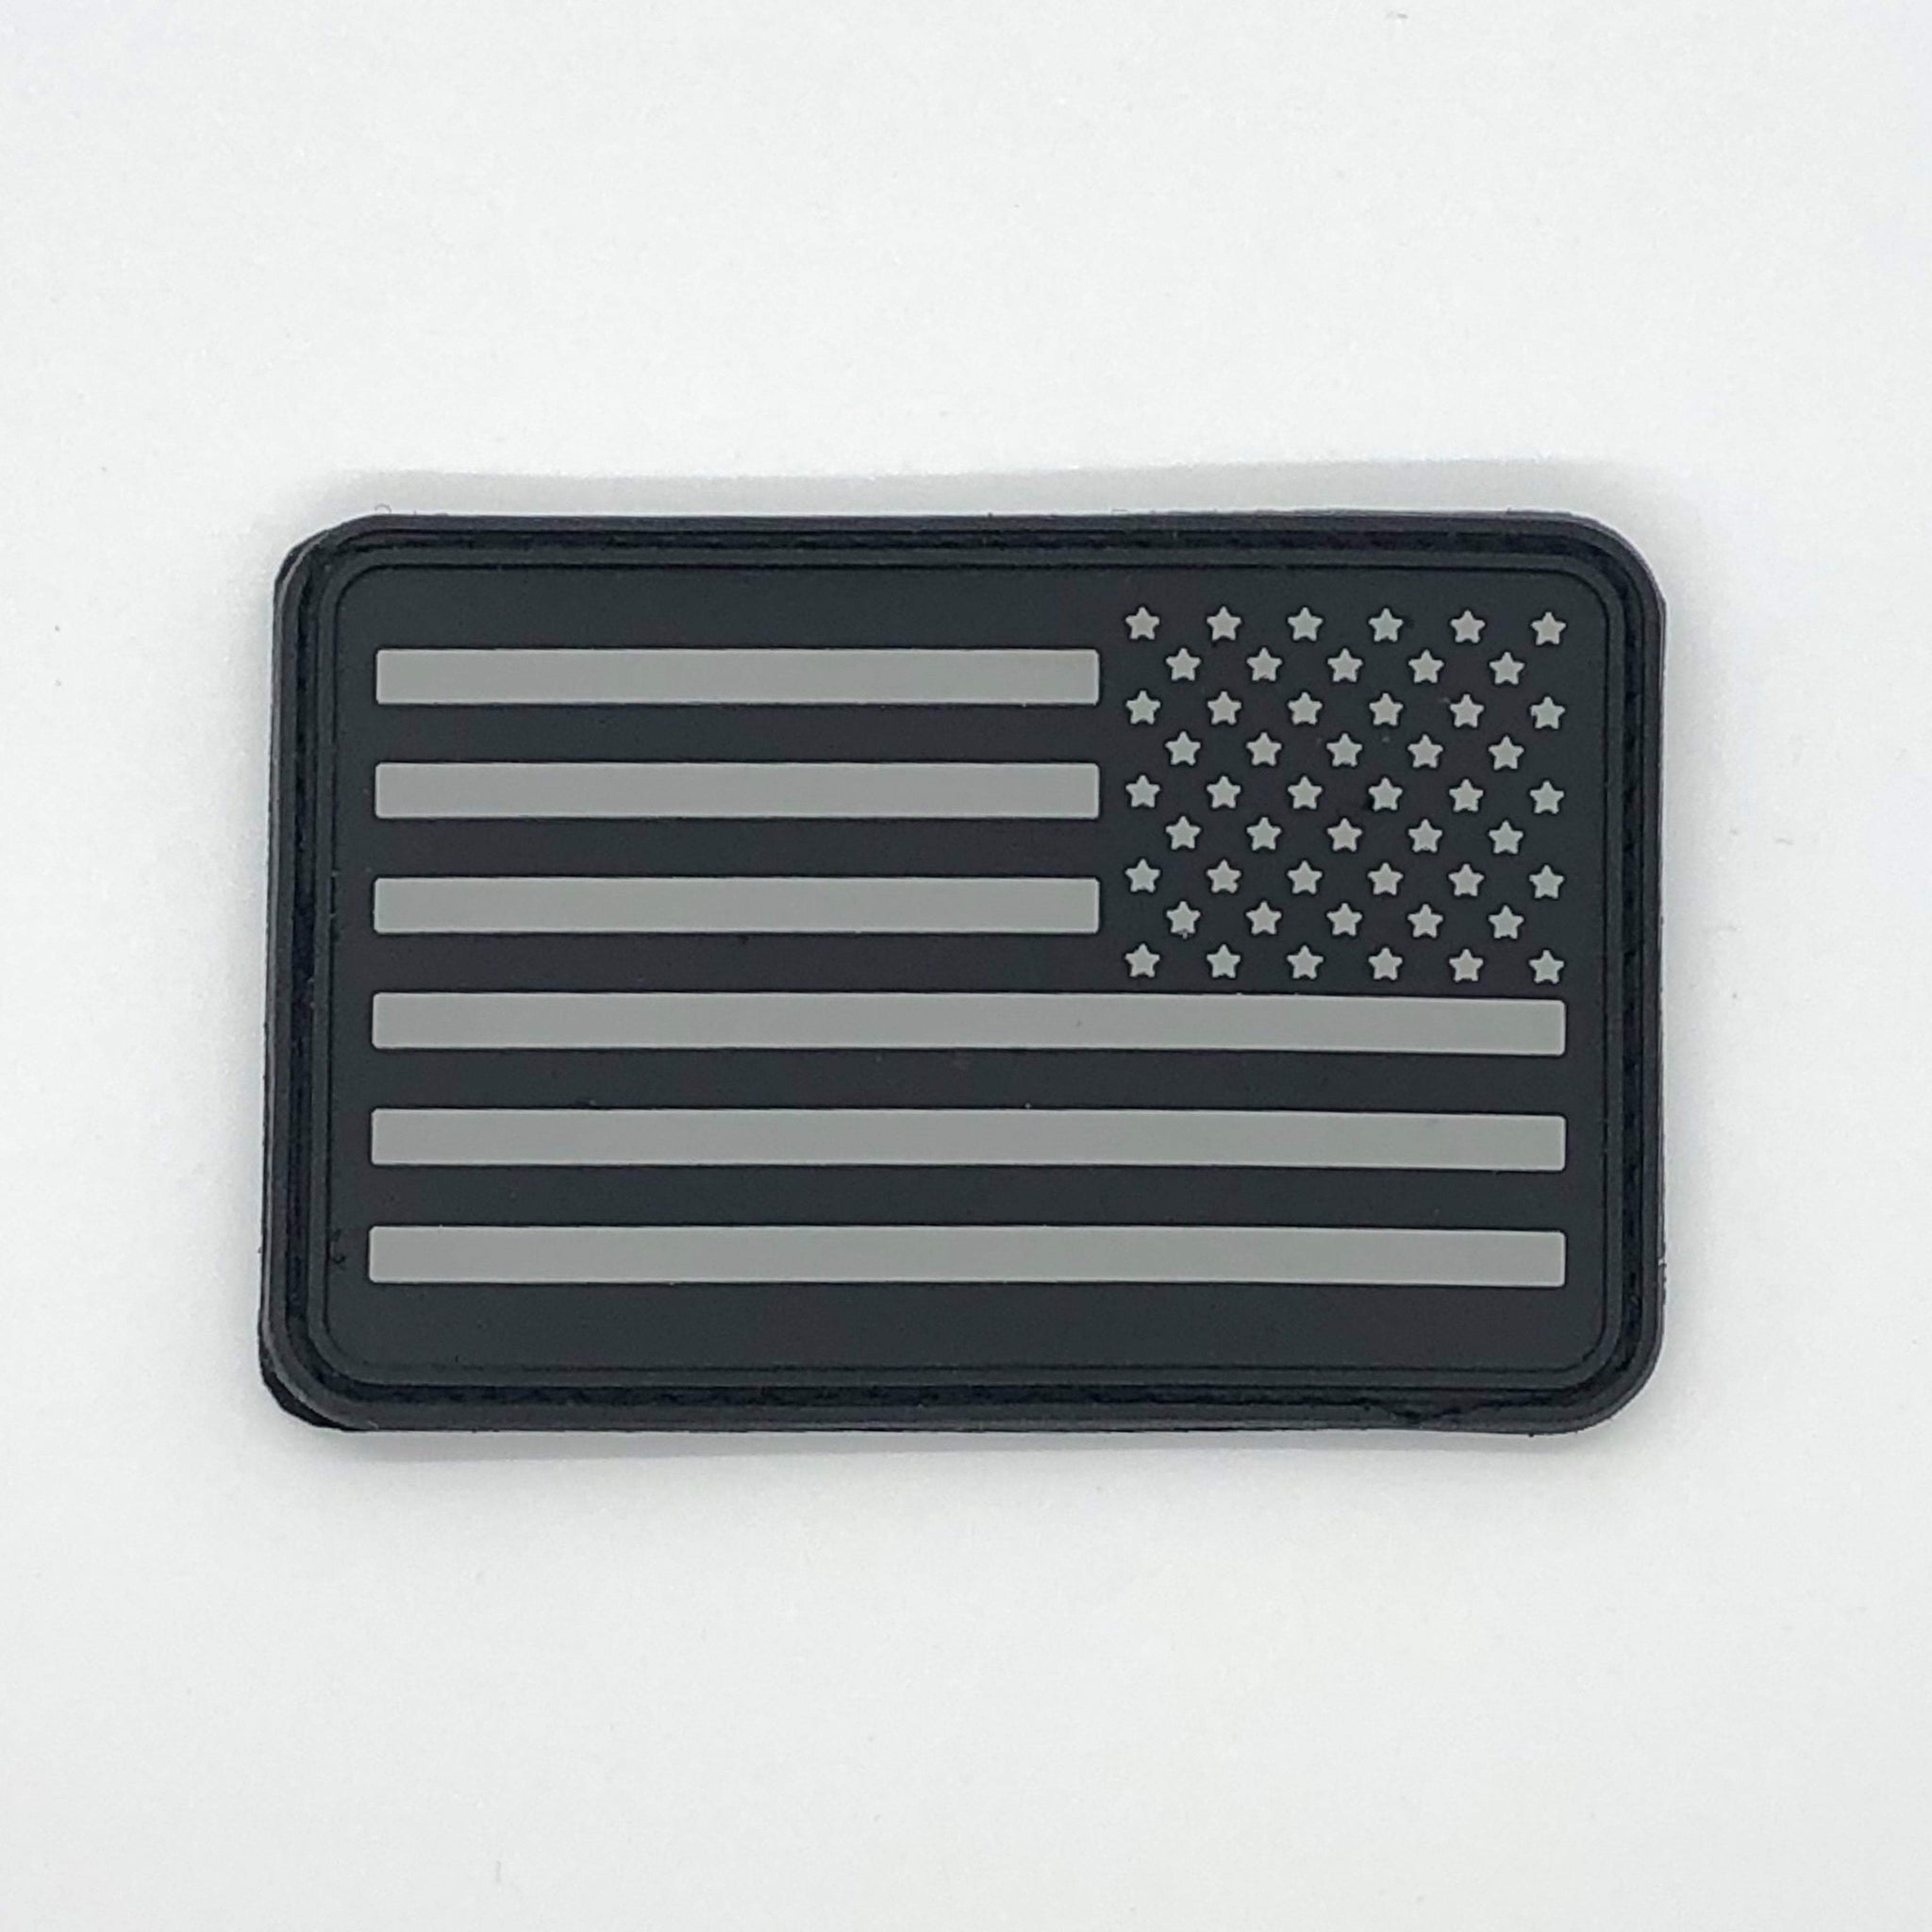 Subdued Thin Blue Line American Flag Patch 3 x 2